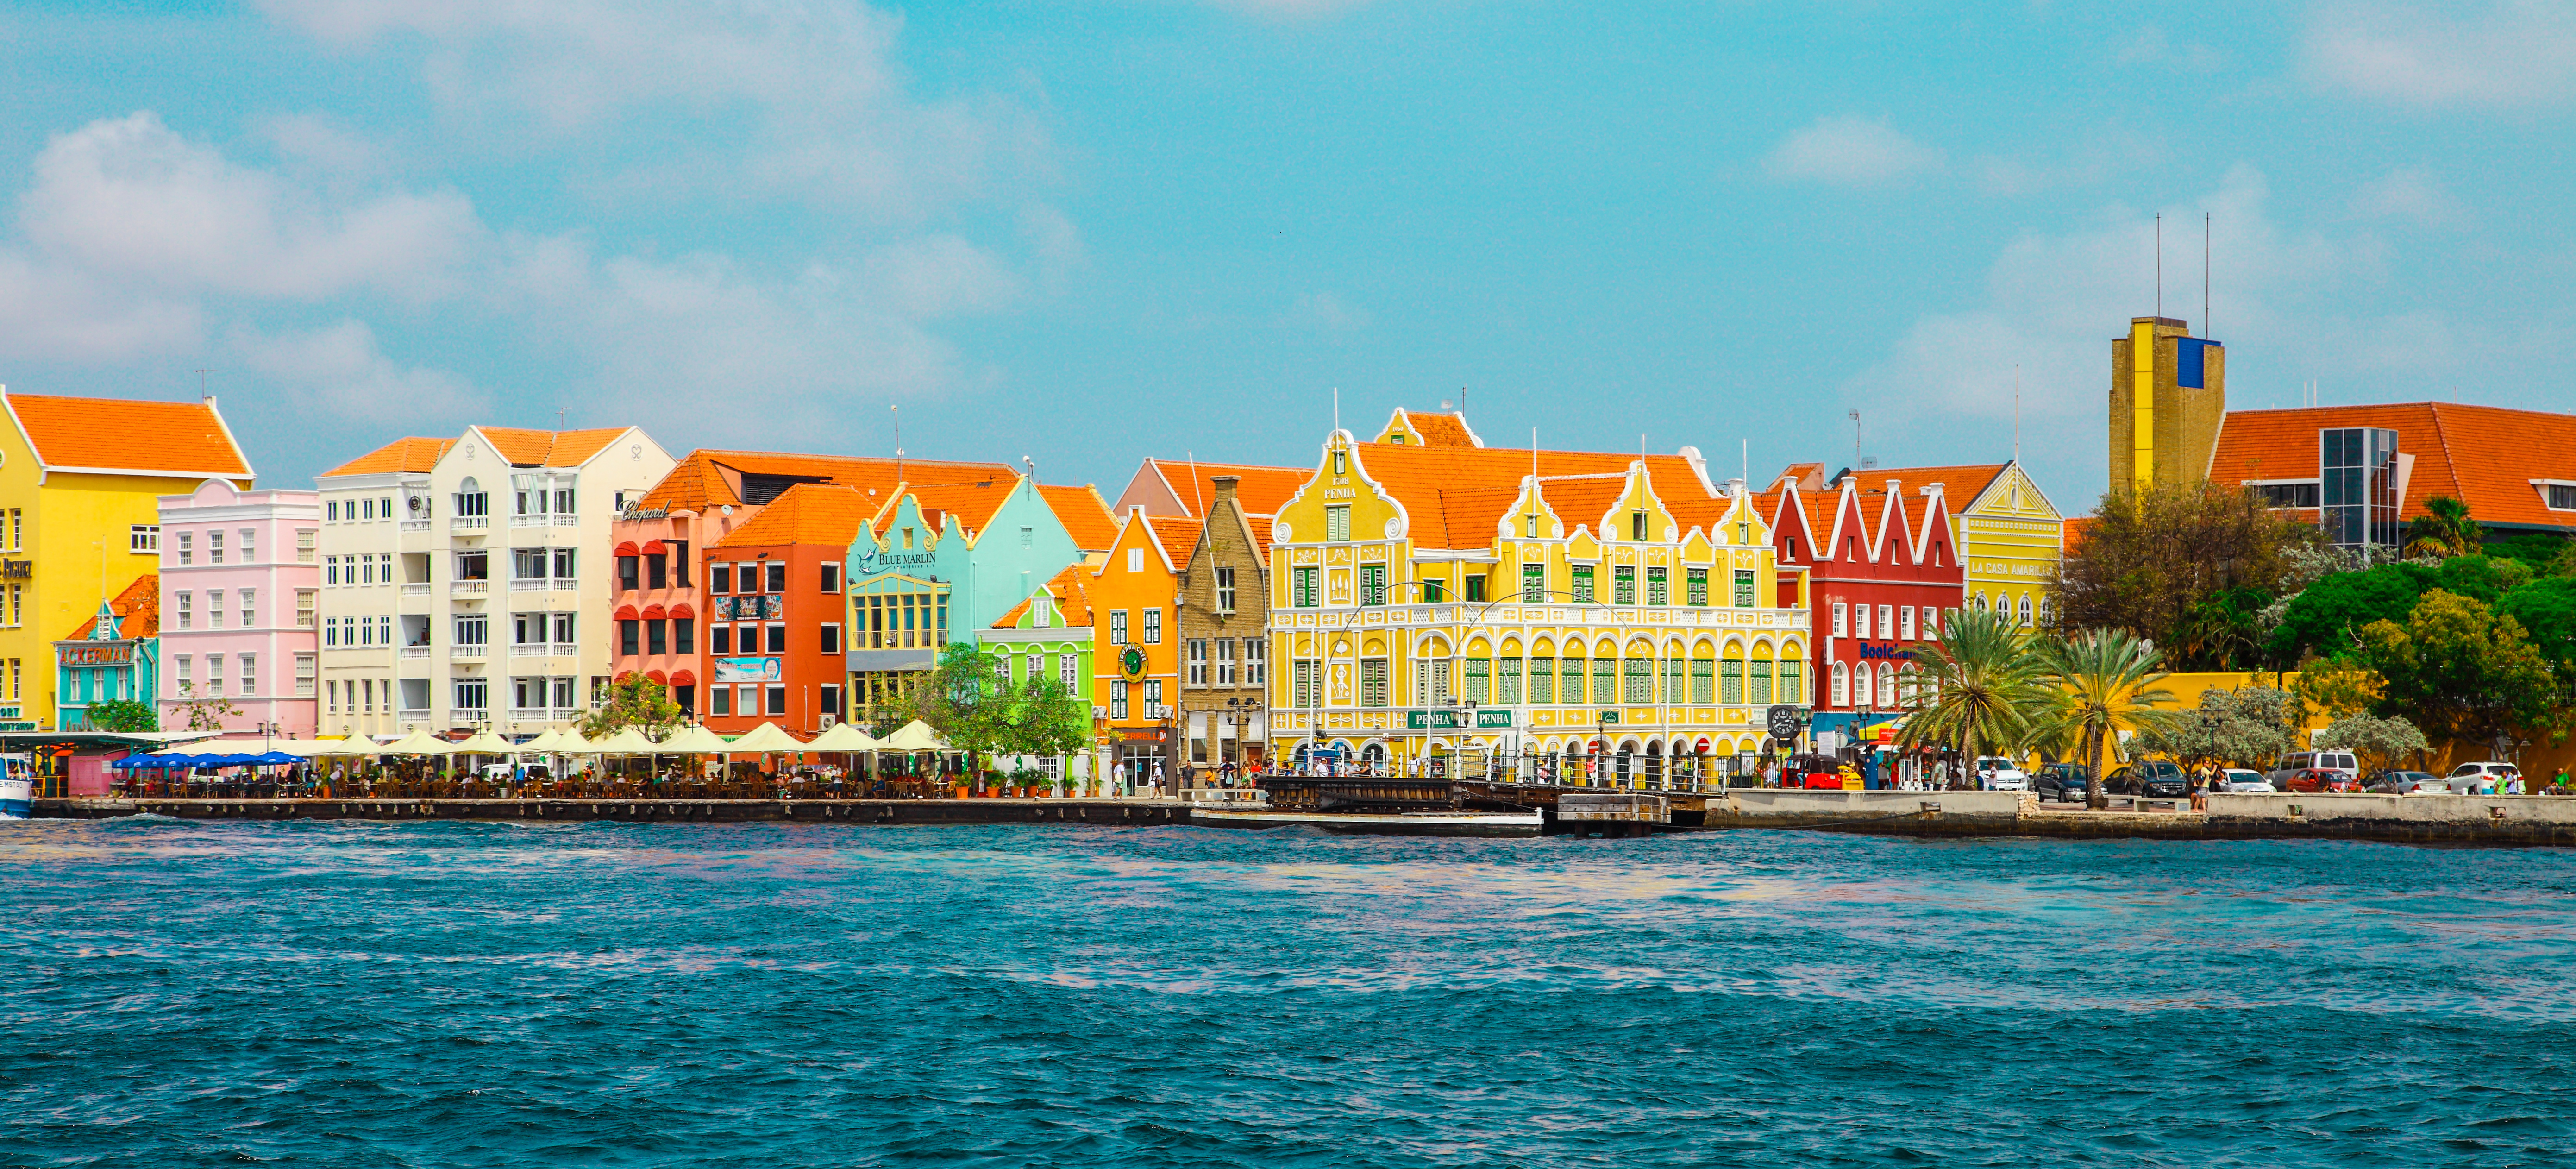 Willemstad, the Capital City of Curacao